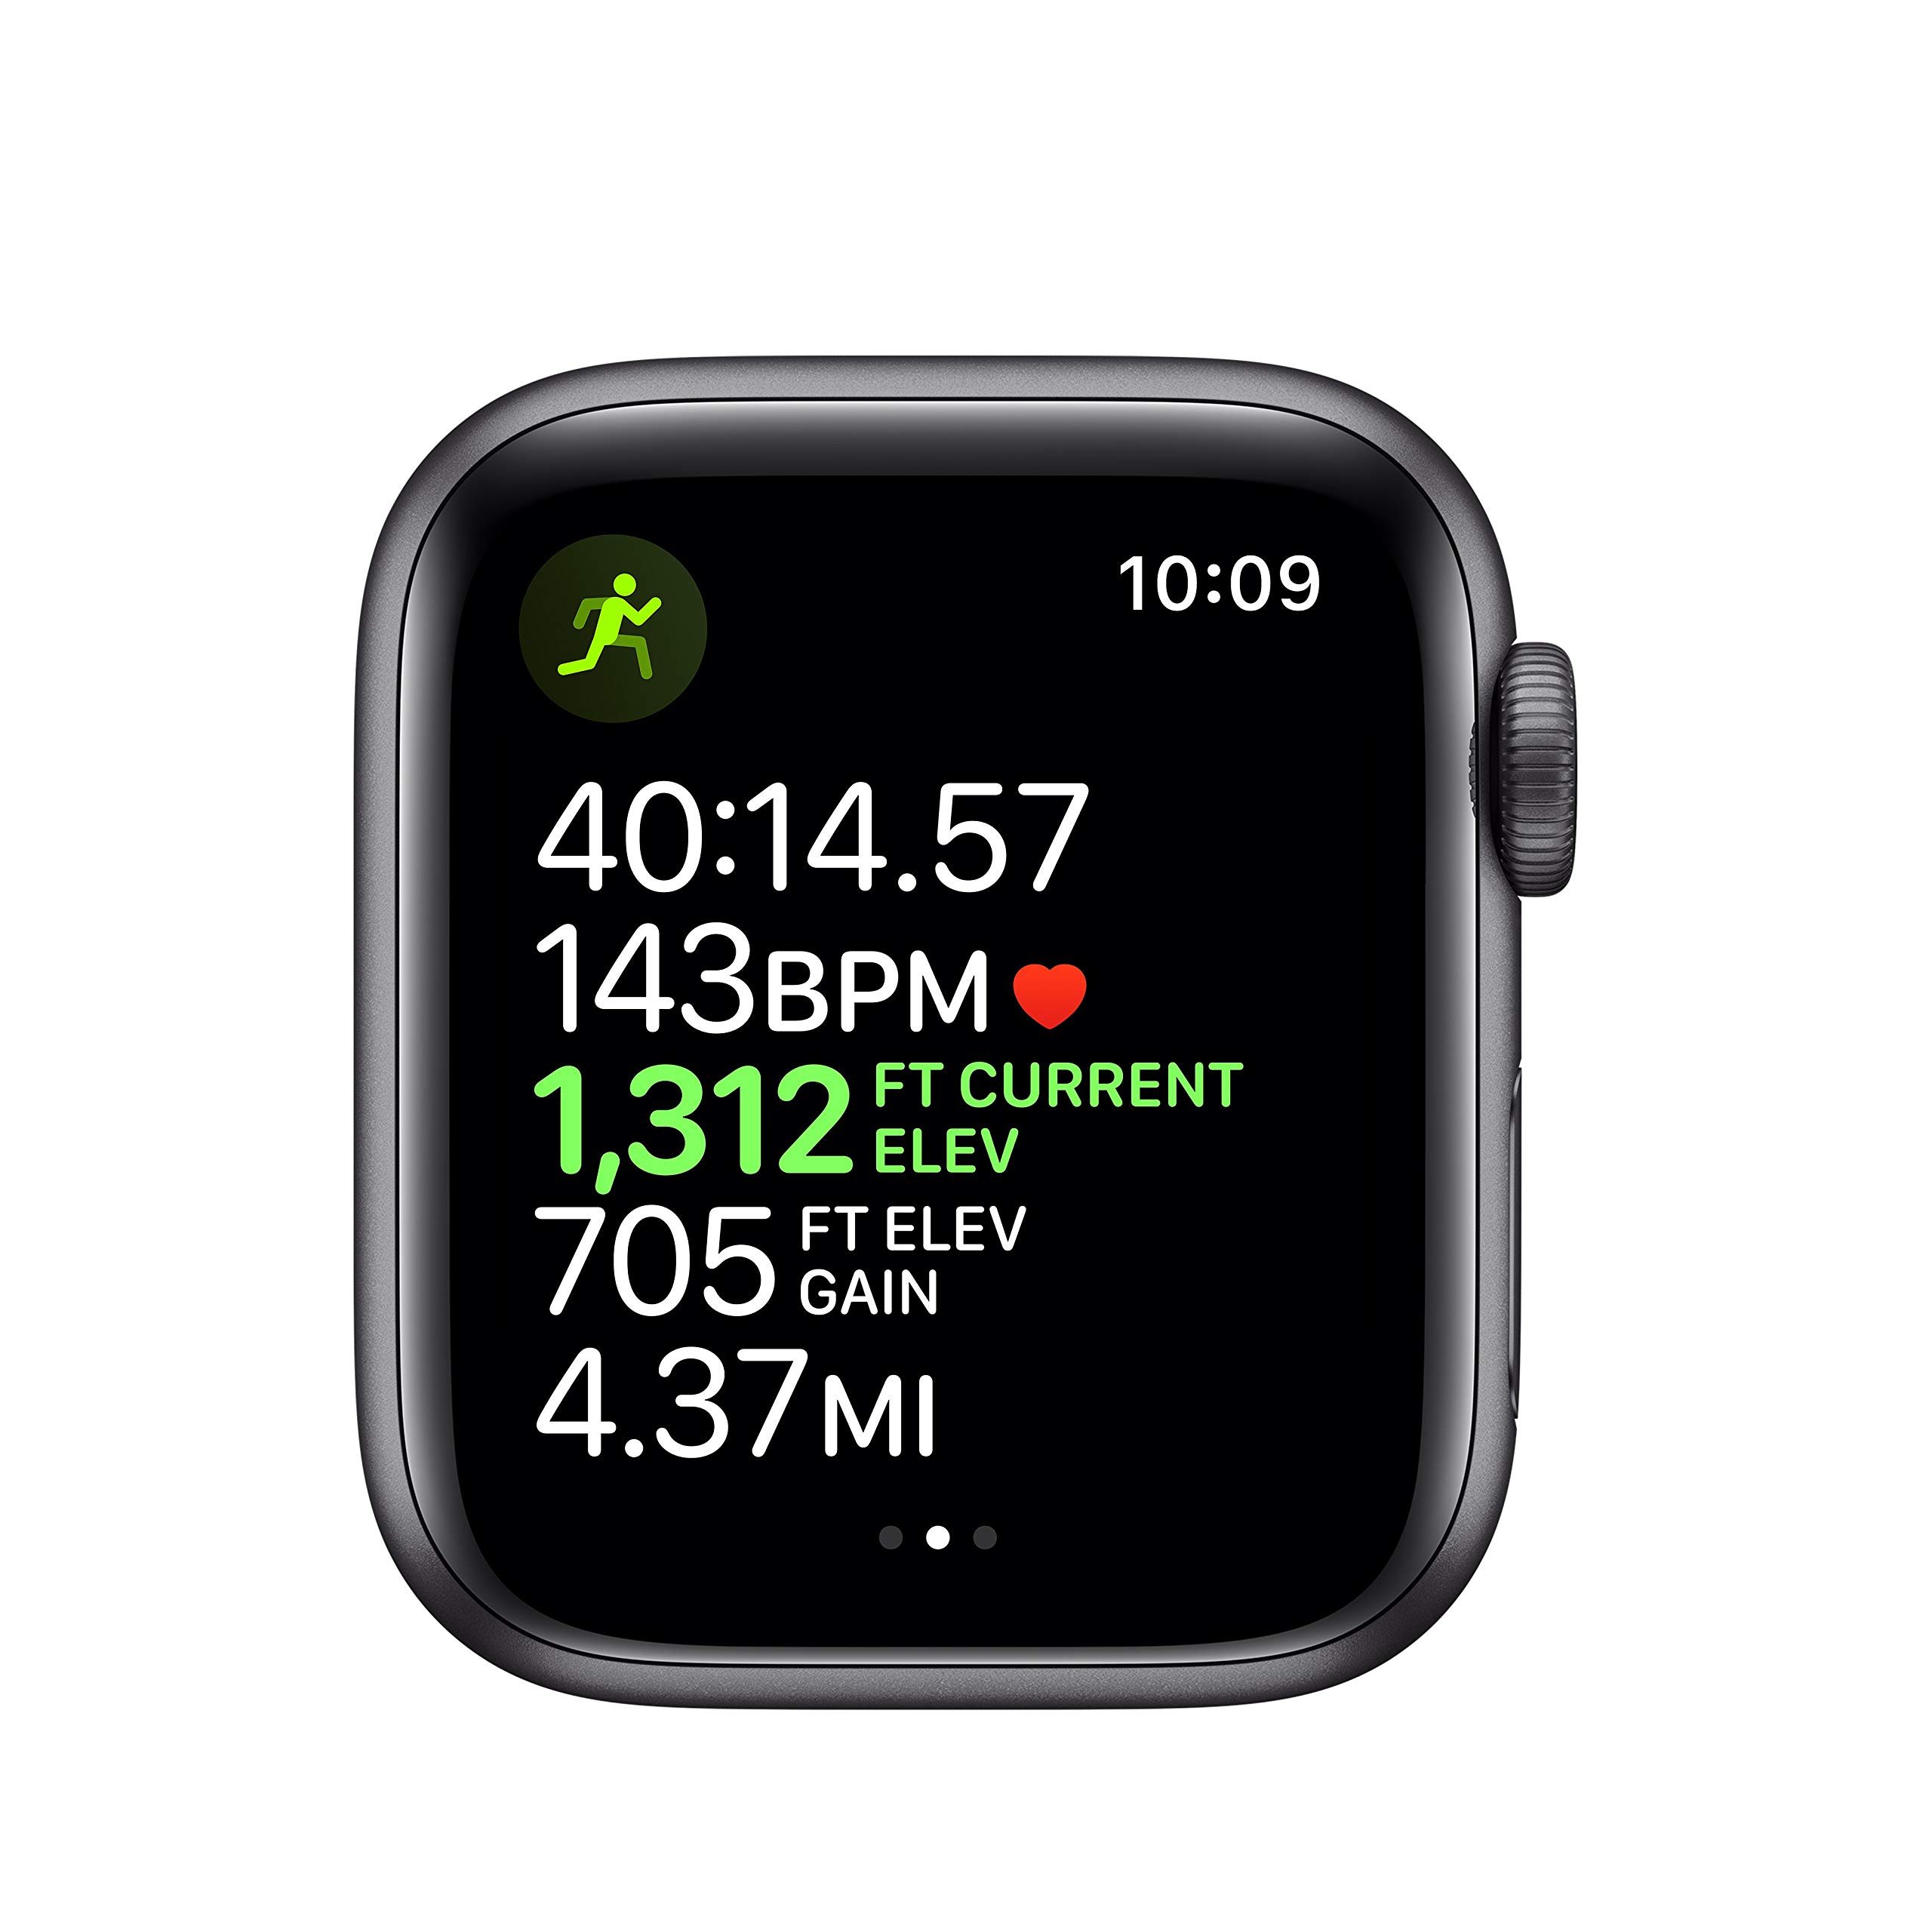 Apple Watch Series 5 (GPS + Cellular, 44mm) - Space Gray Aluminum Case with Black Sport Band